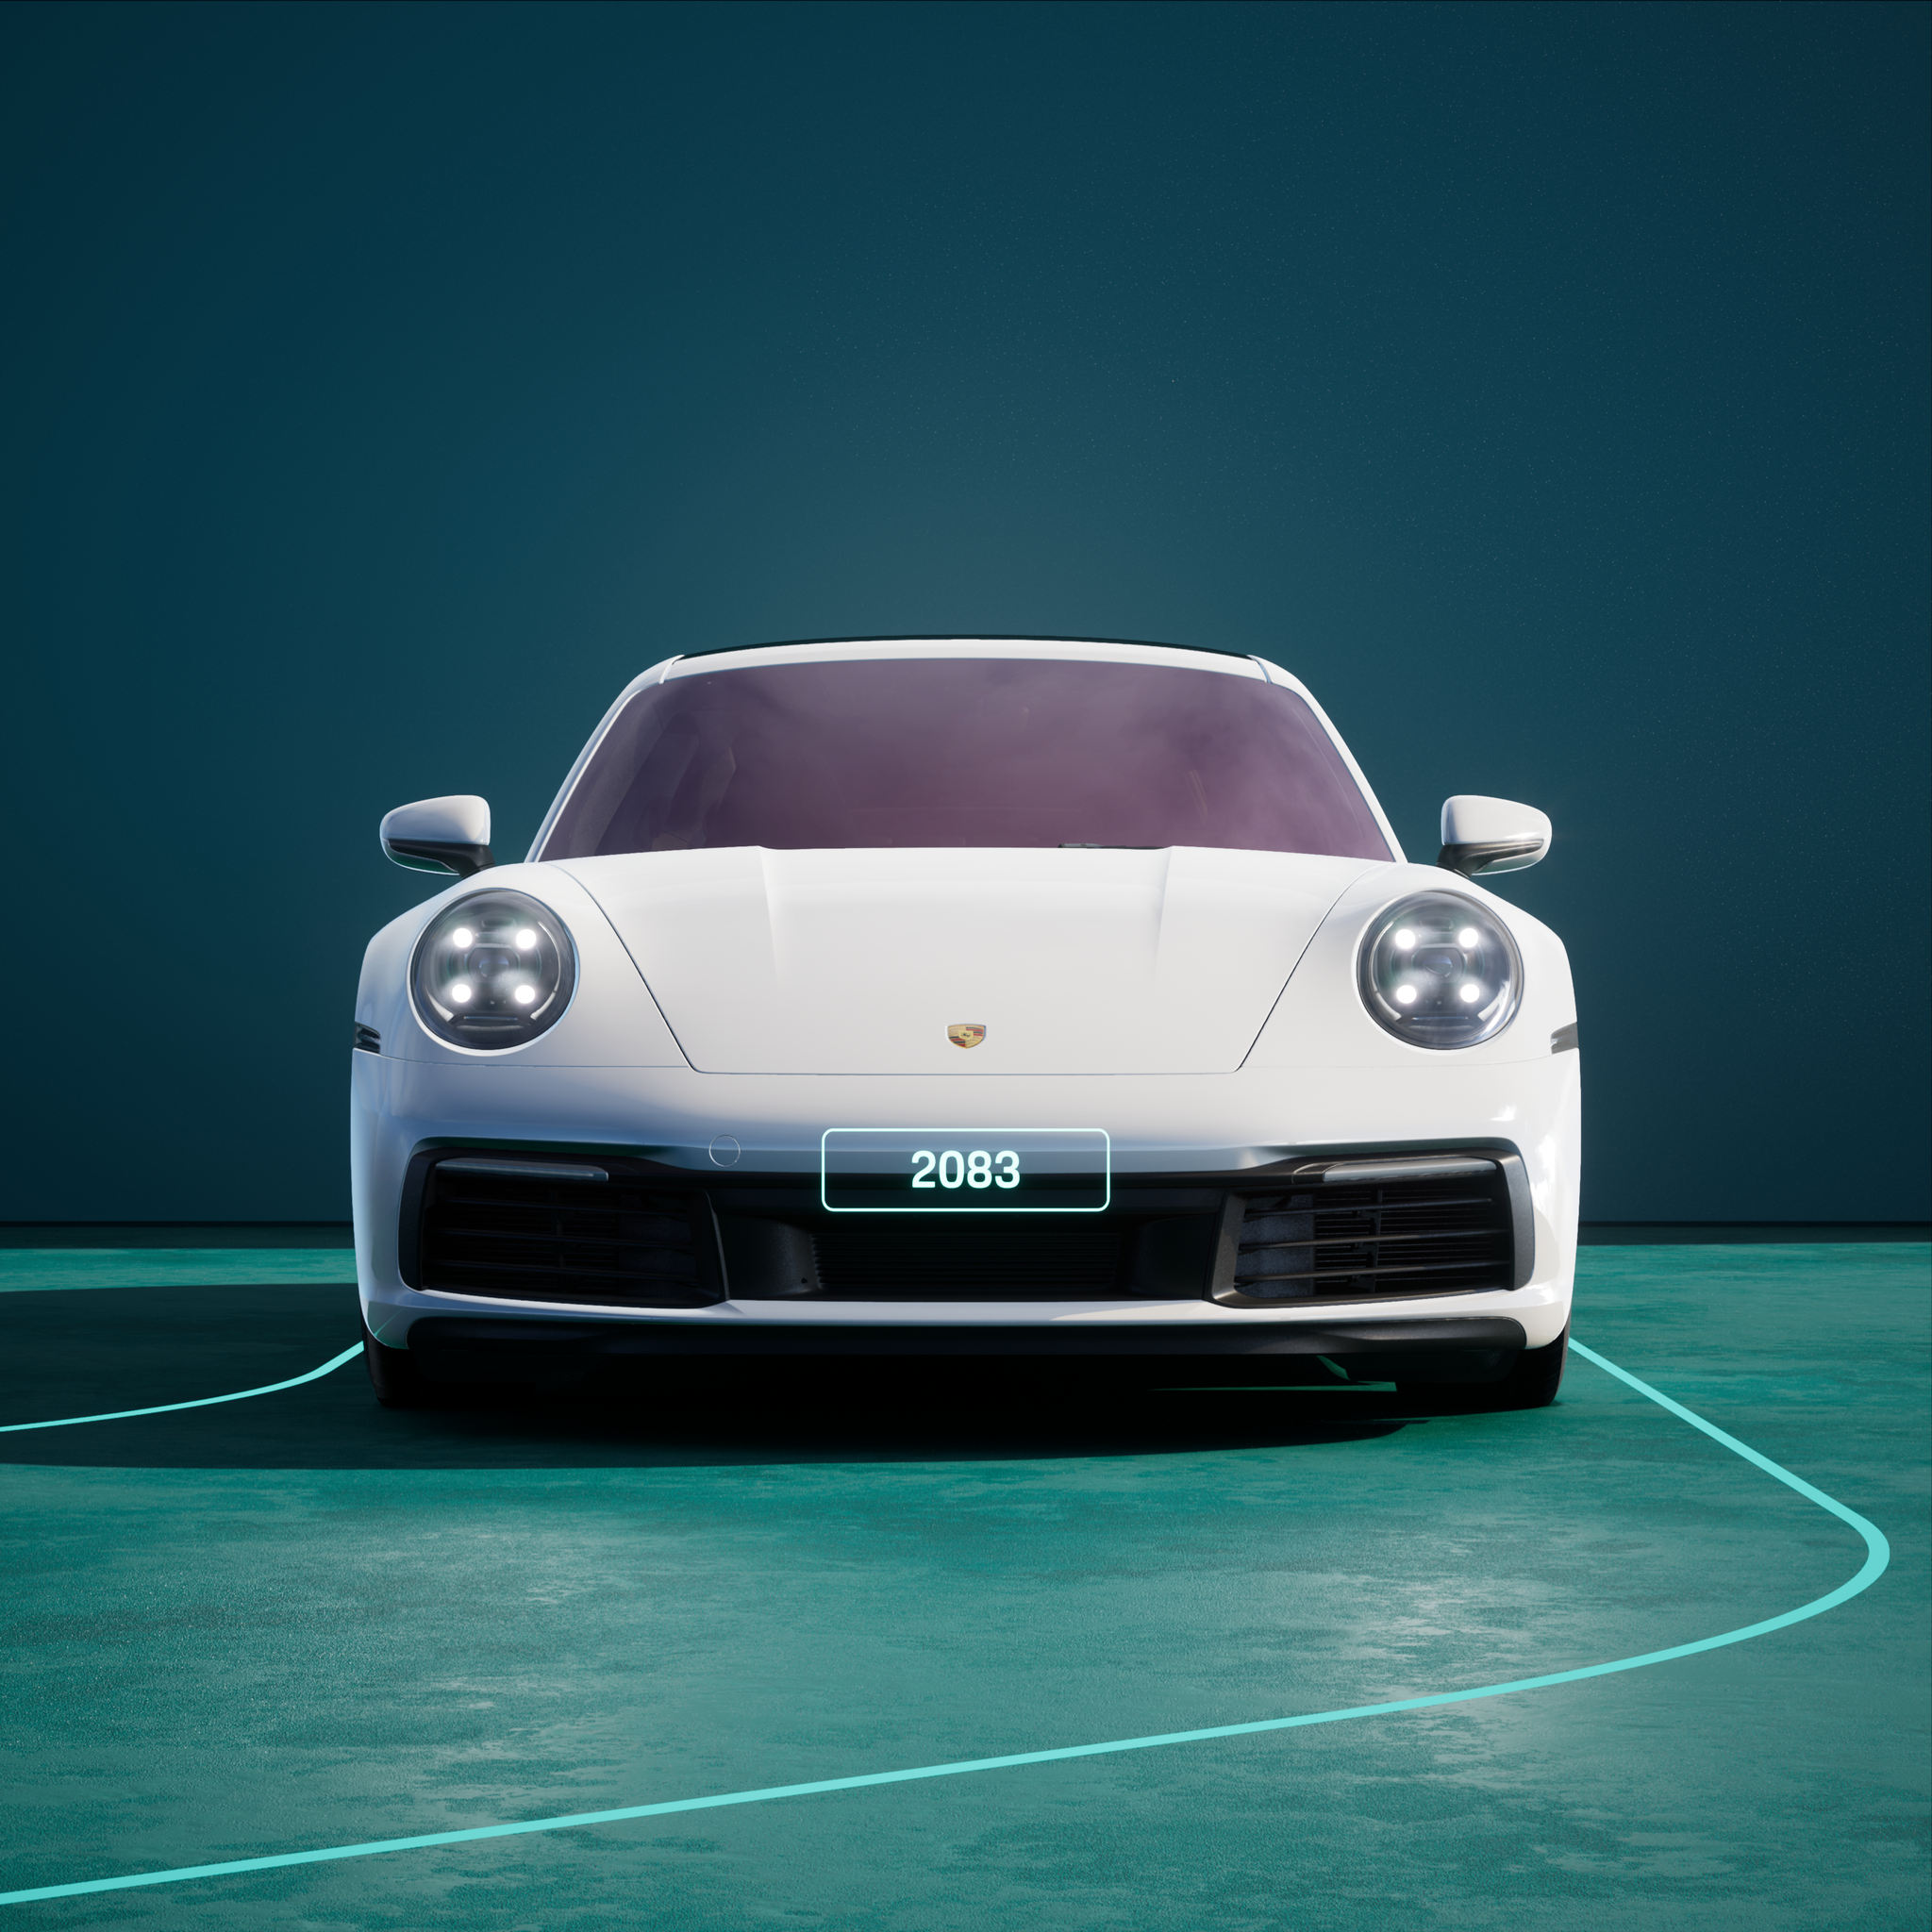 The PORSCHΞ 911 2083 image in phase